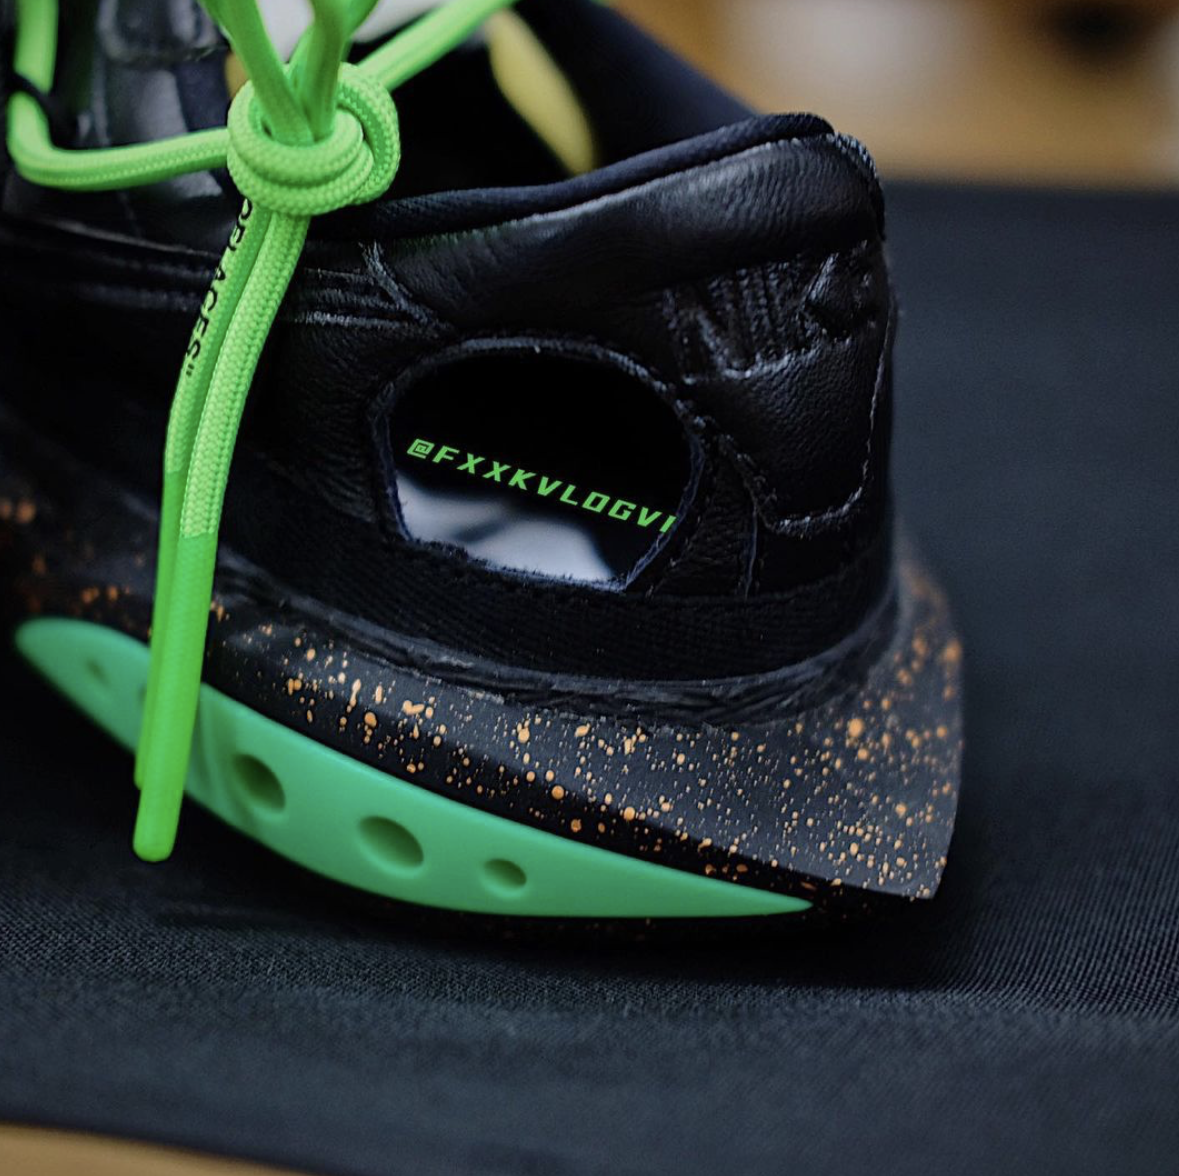 Blazer Low x Off-White™️ 'Black and Electro Green' (DH7863-001) Release  Date. Nike SNKRS